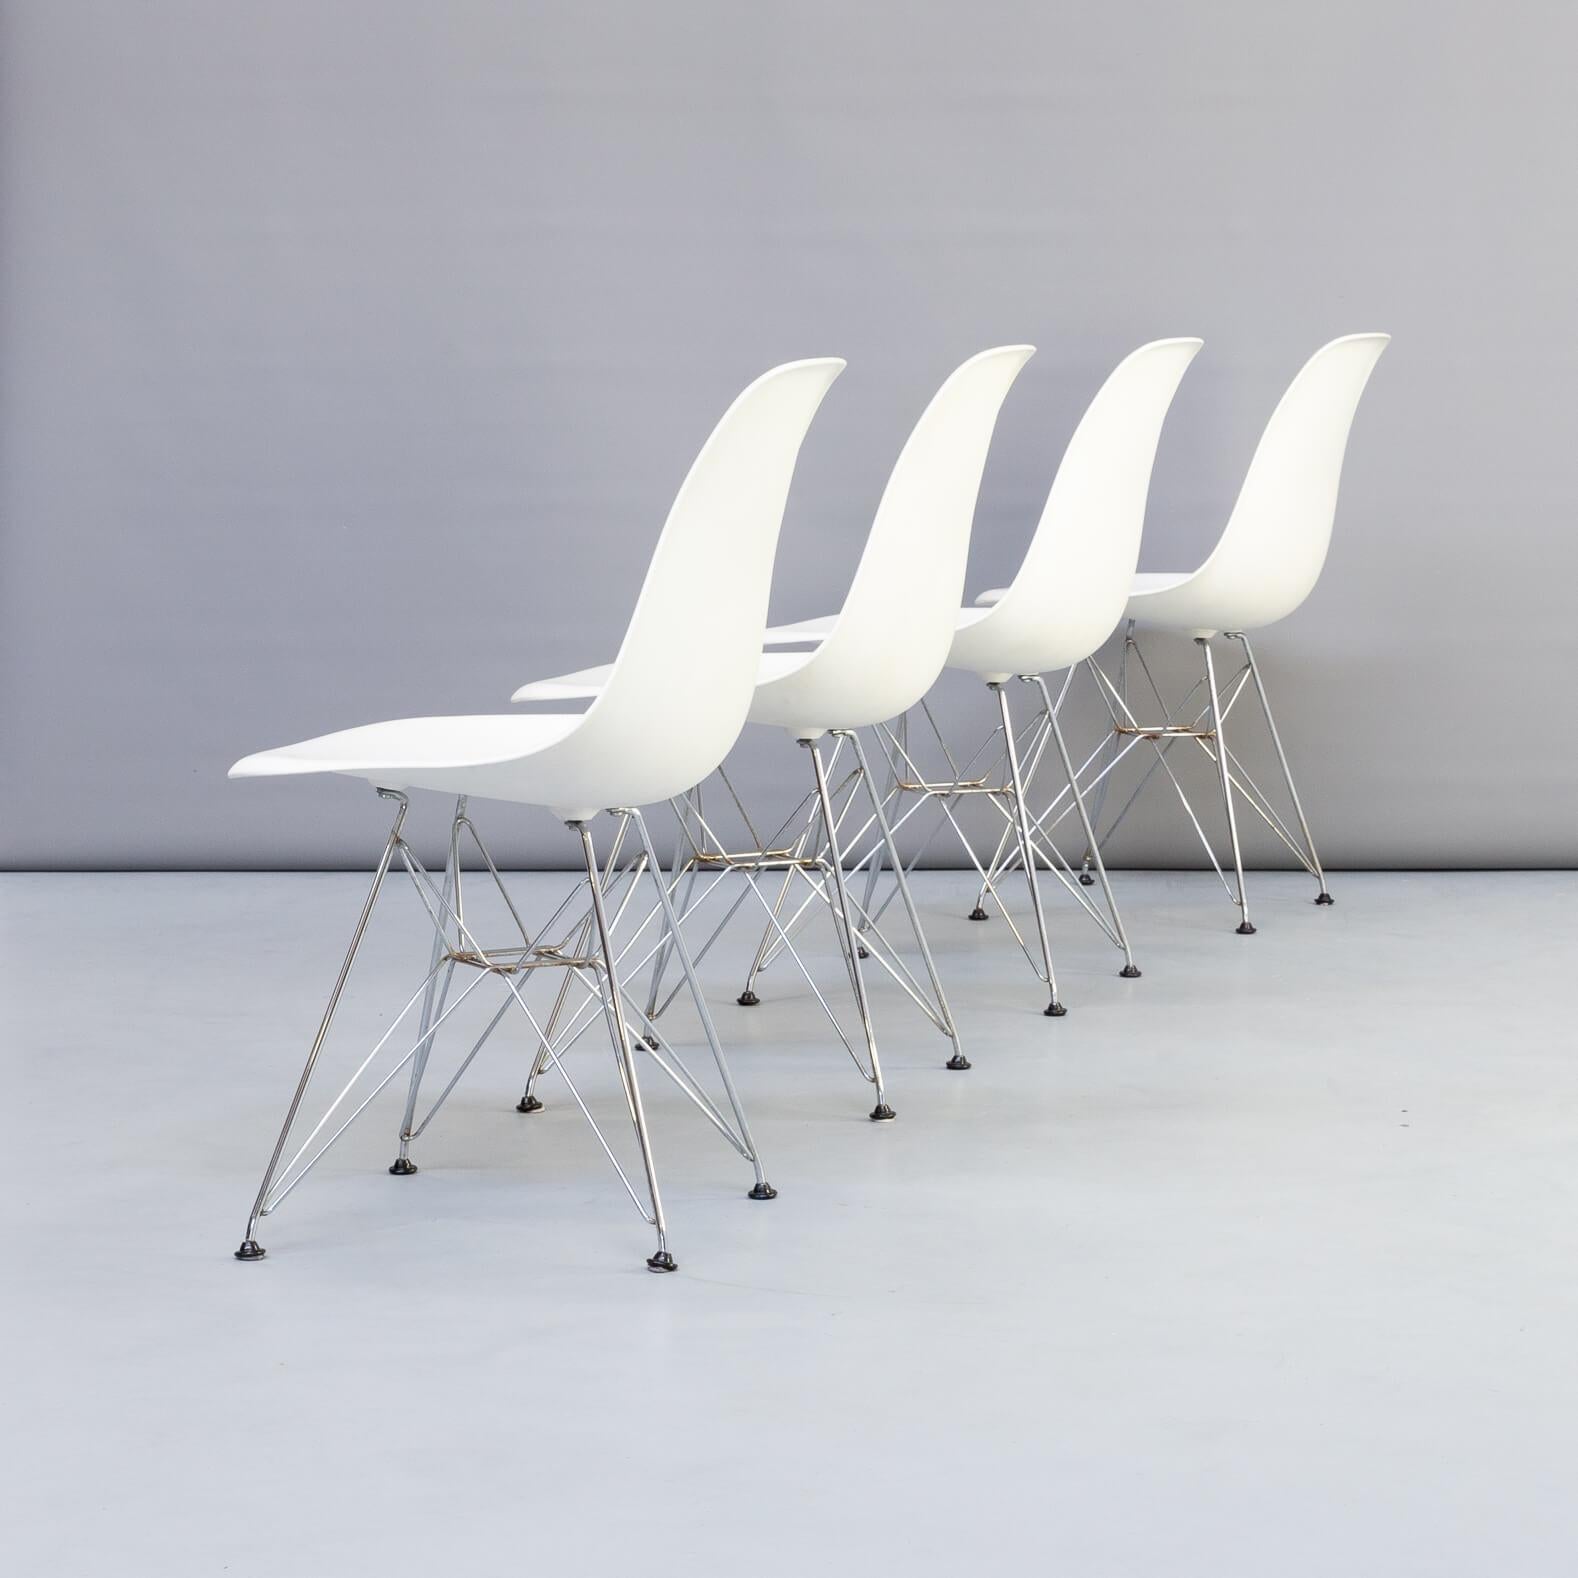 The so-called Eiffel Tower base of the DSR (dining height side chair rod base) chair consists of a complex and elegant steel wire construction, combined with light, elegant shapes with structural strength. The organically shaped plastic shell is in